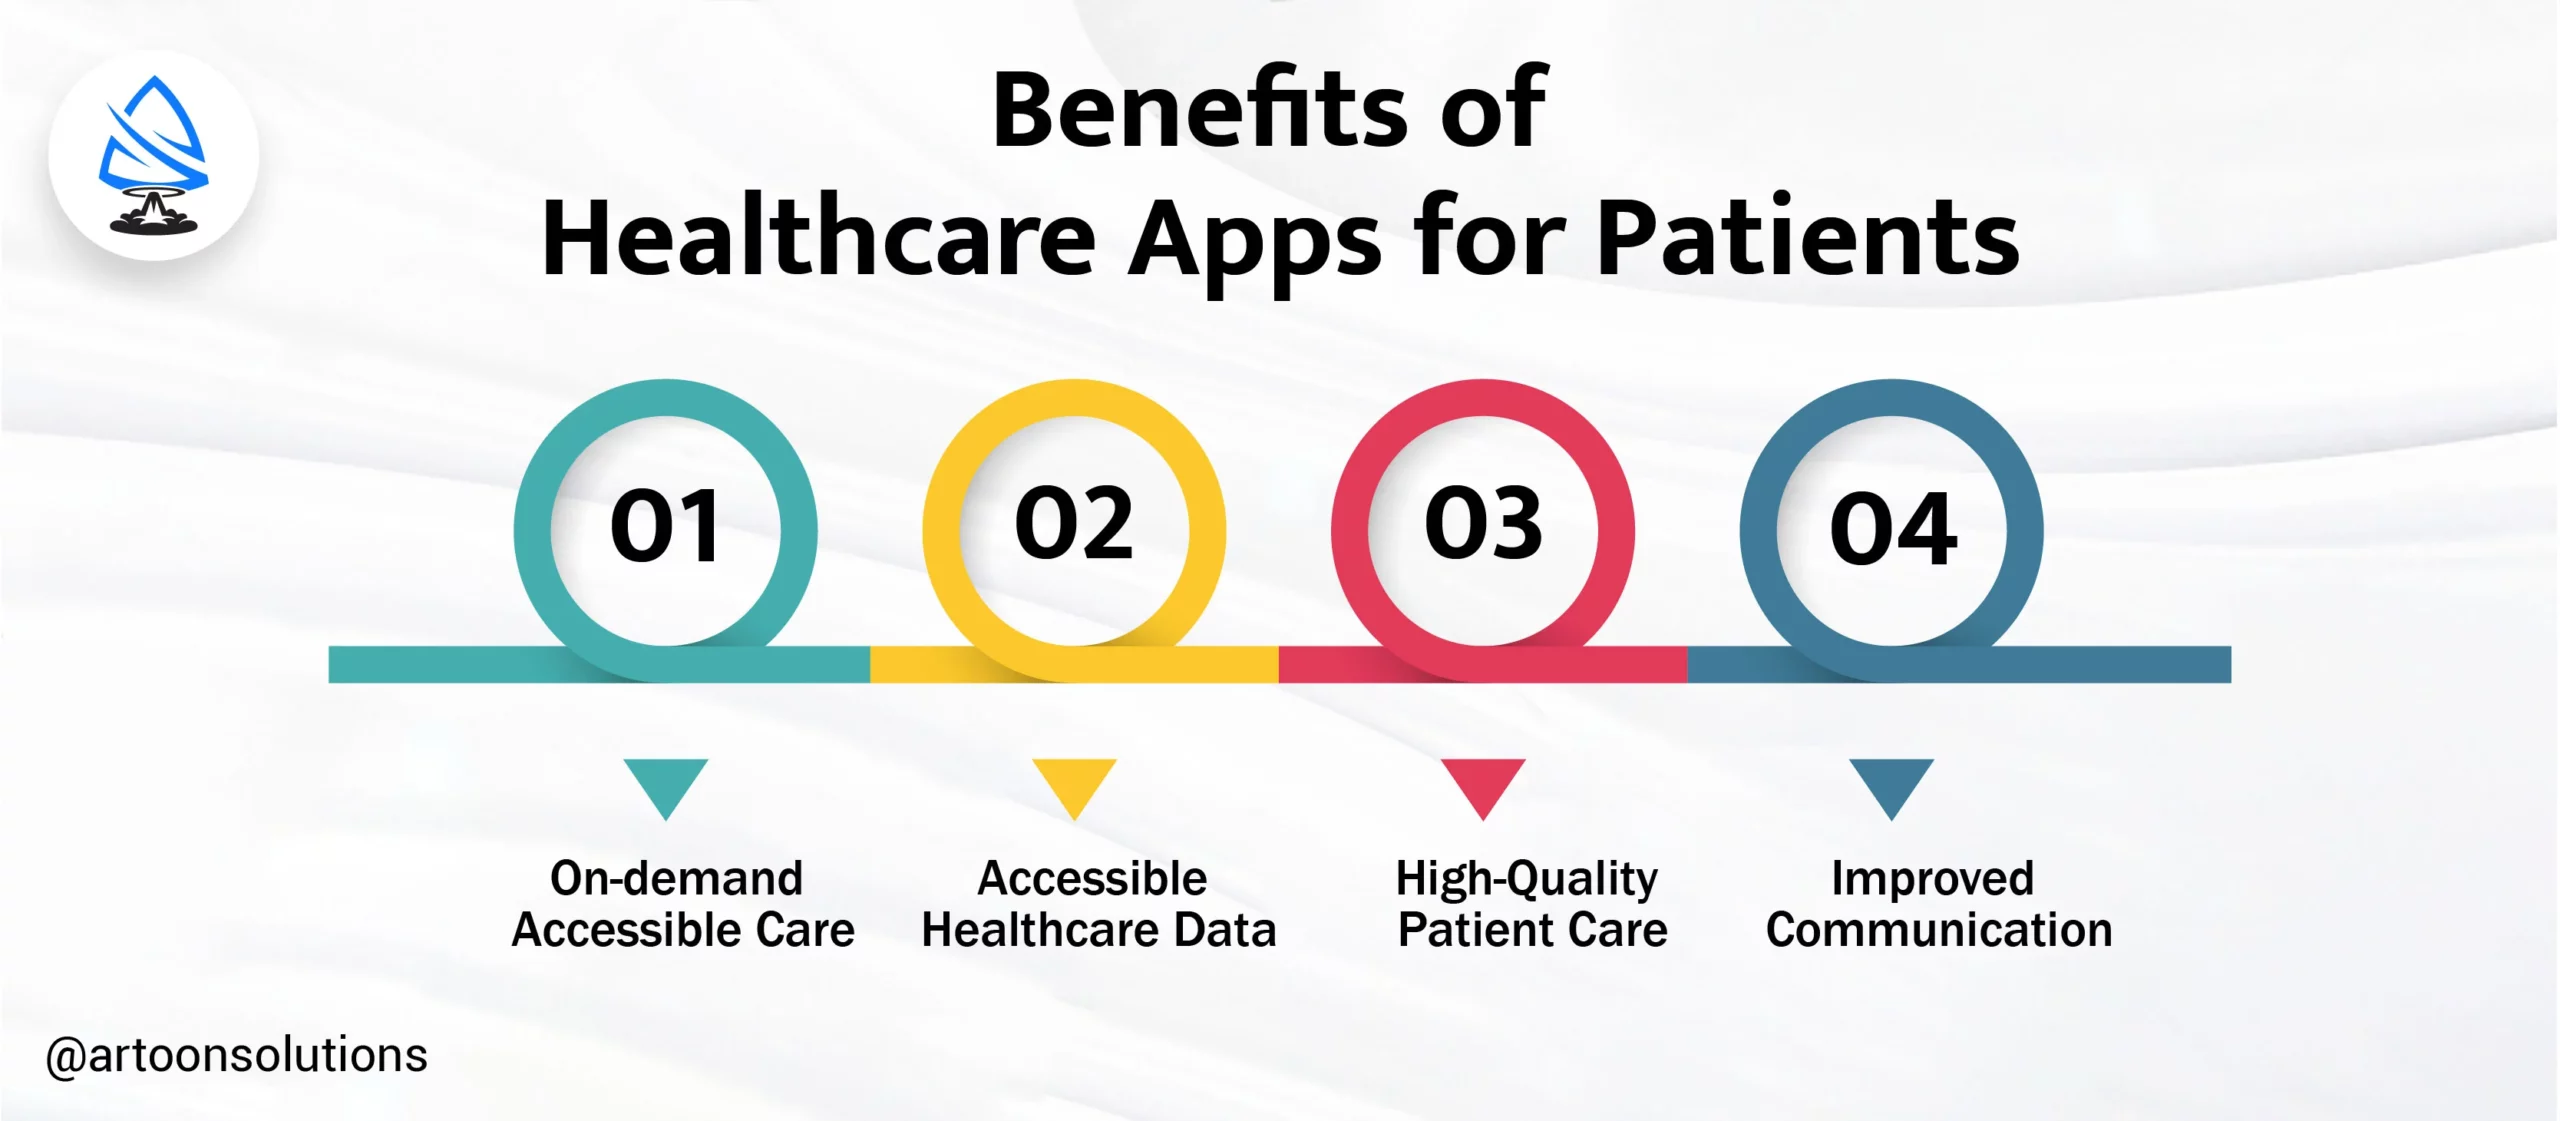 Benefits of Healthcare Apps for Patients